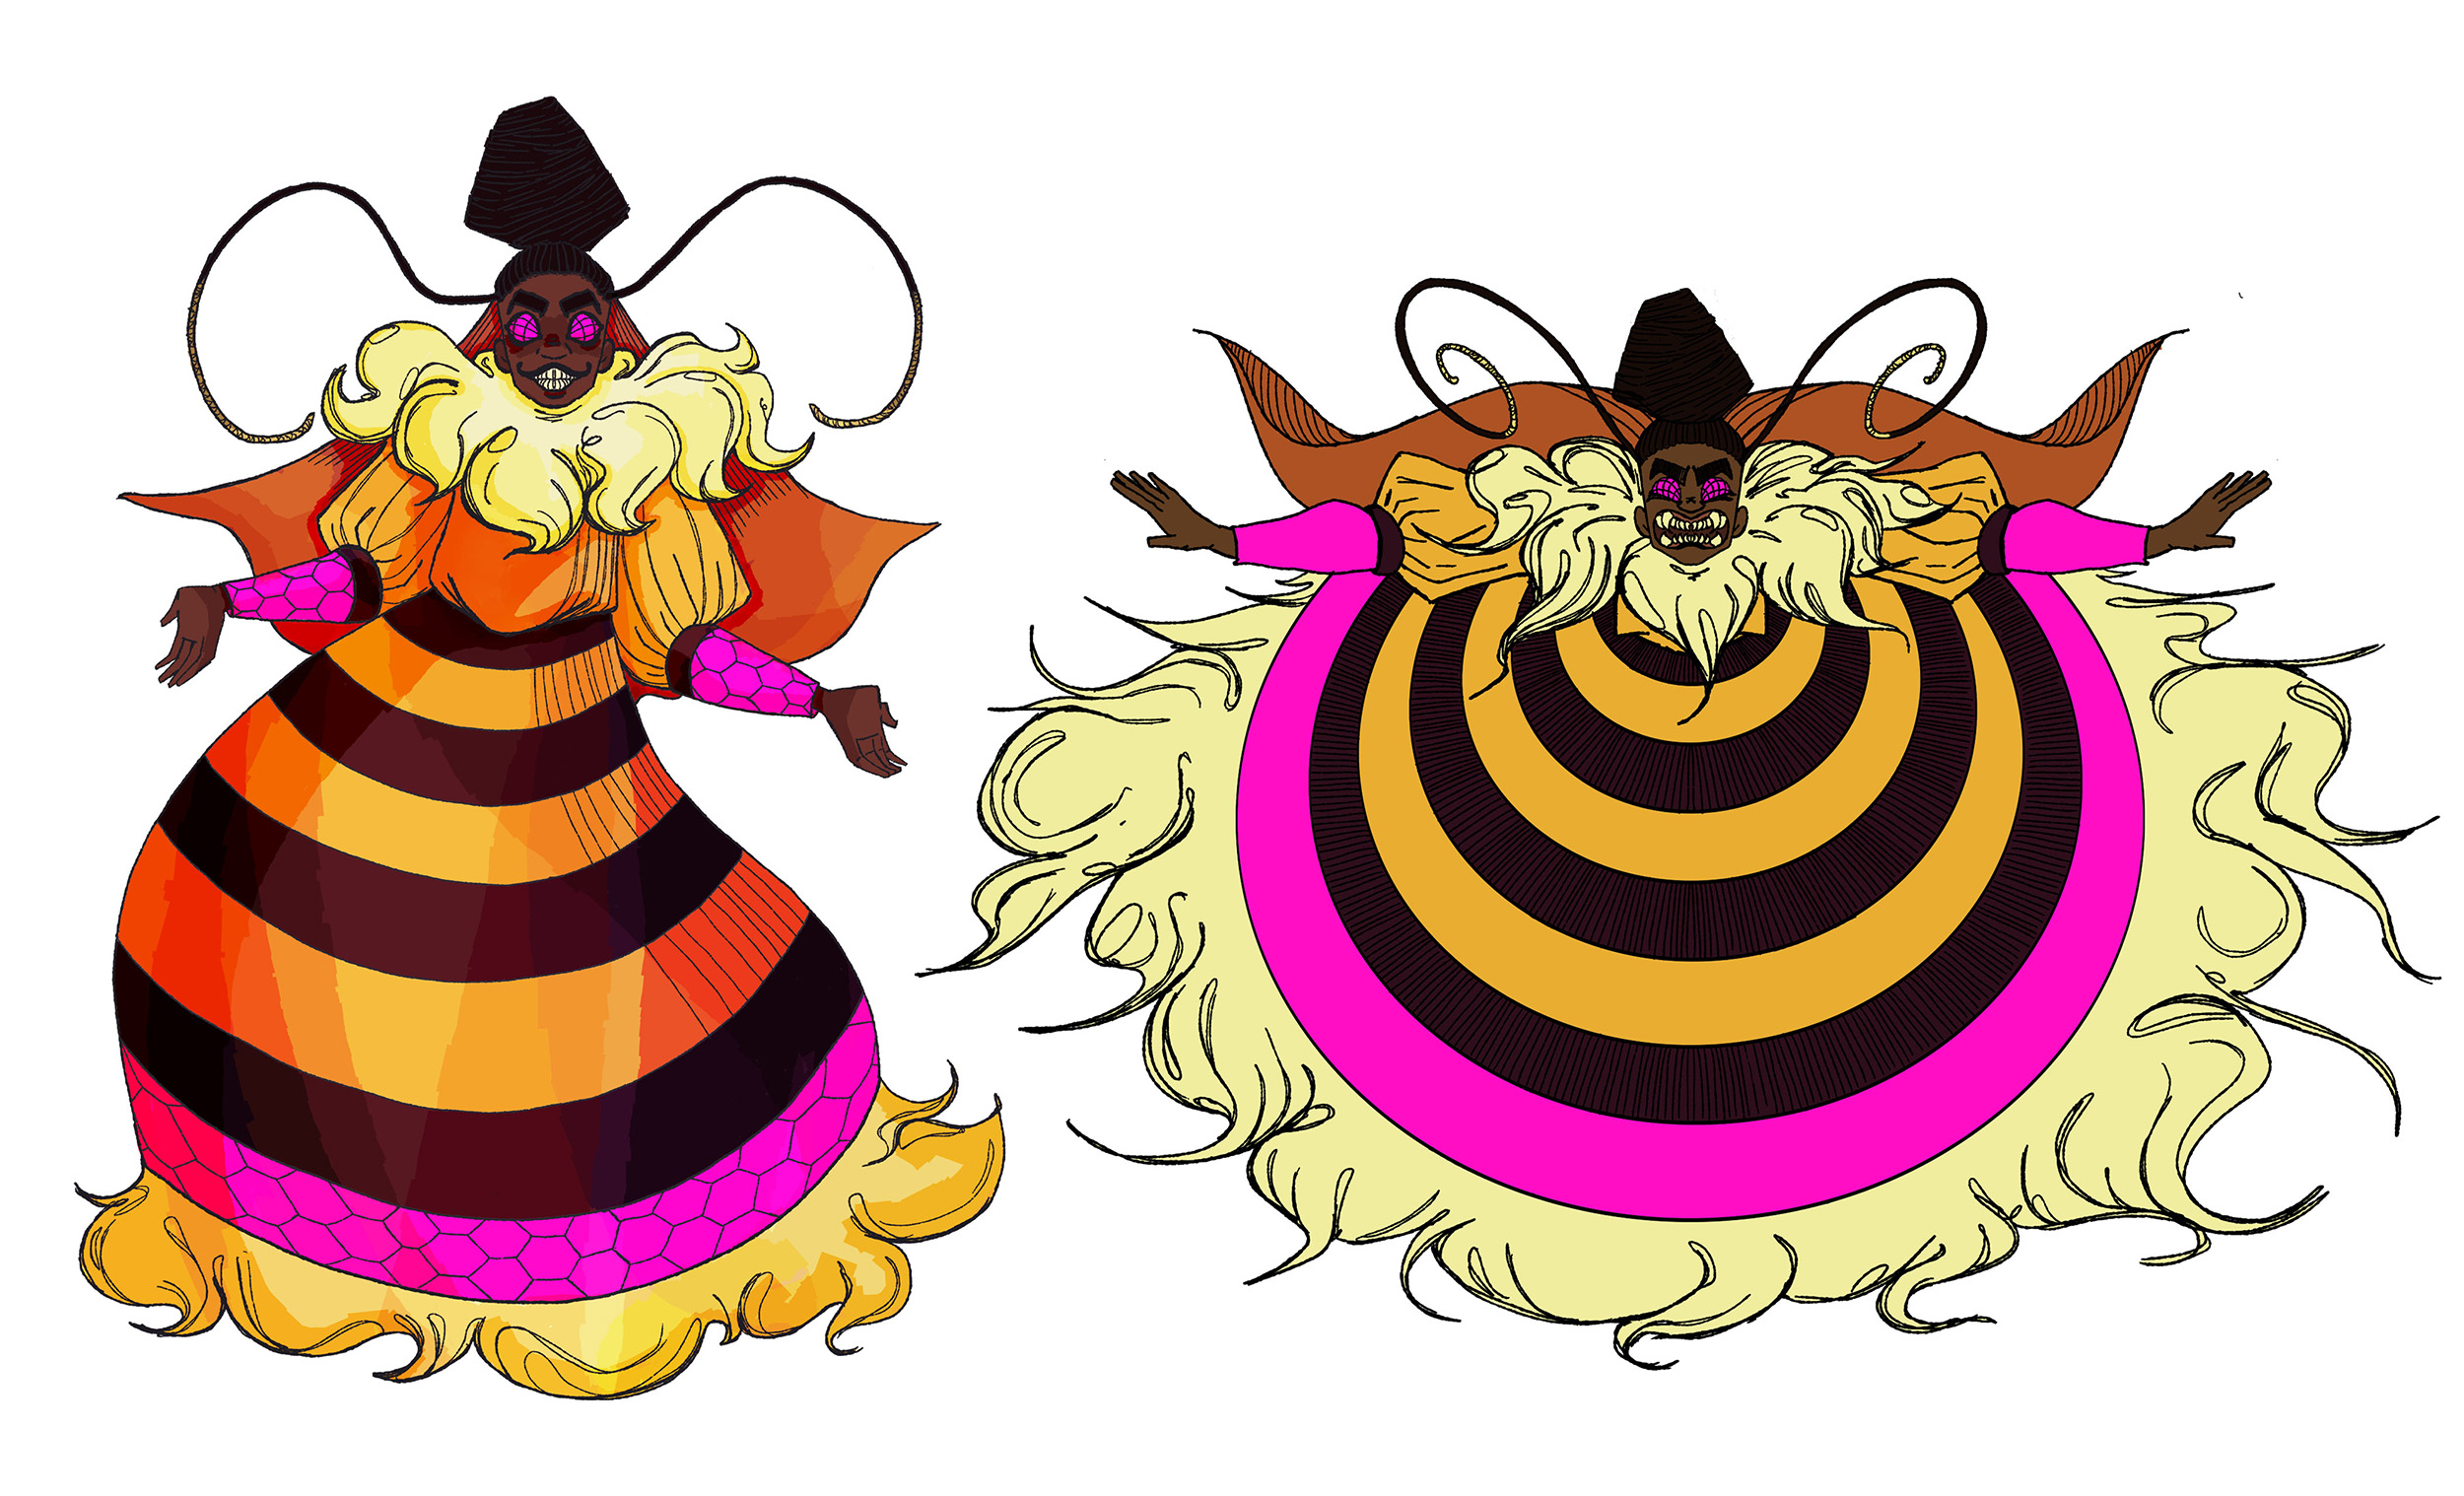 "Queen Bee" / "Queen Bee" Concept of a video game boss, created using Adobe Photoshop